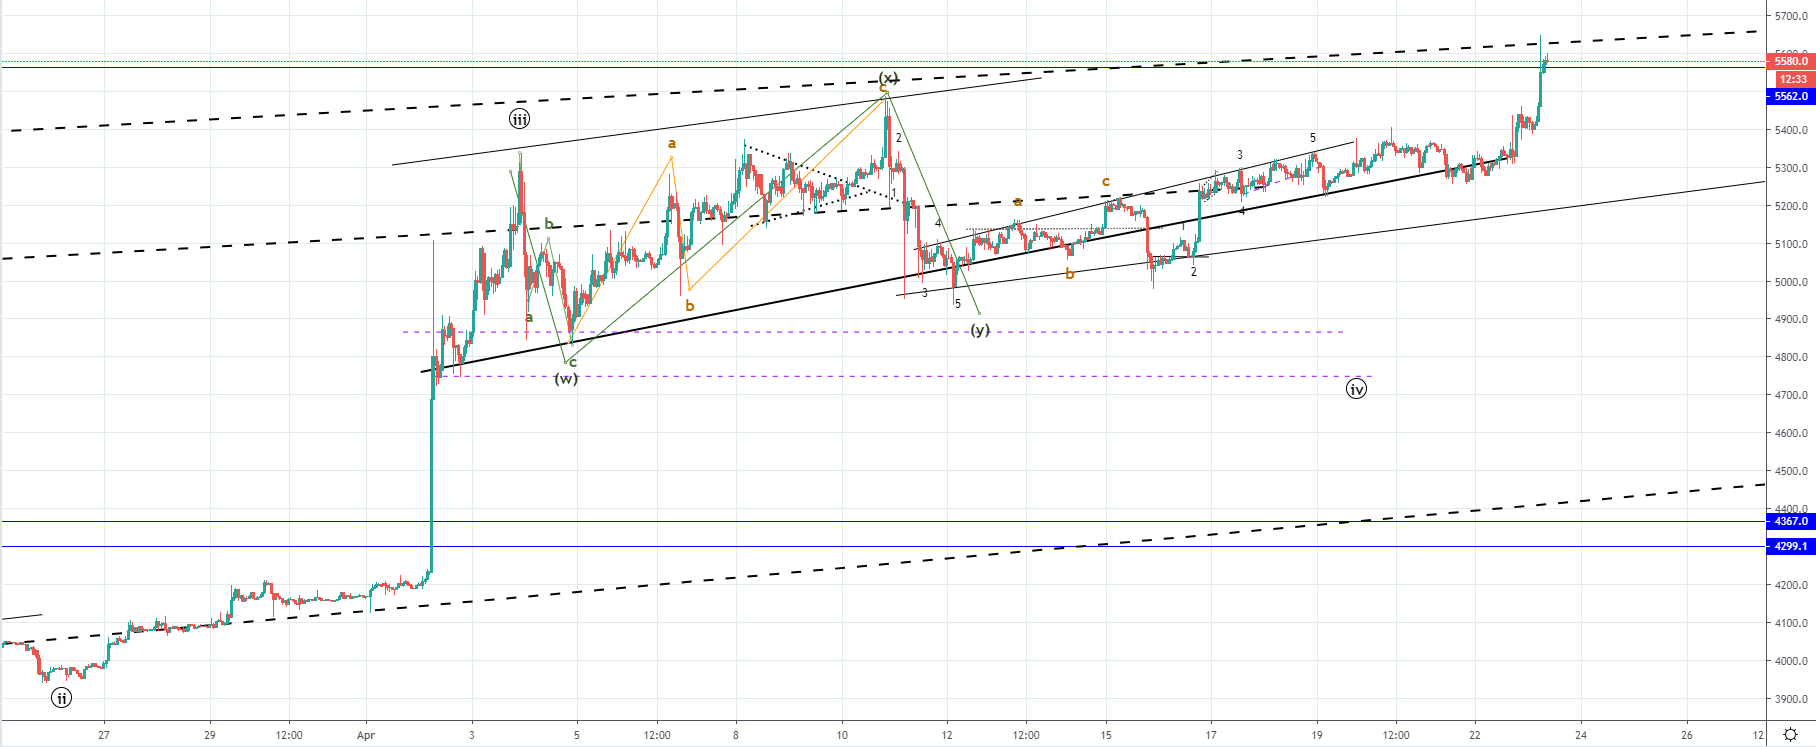 BTC/USD and XRP/USD - more upside expected